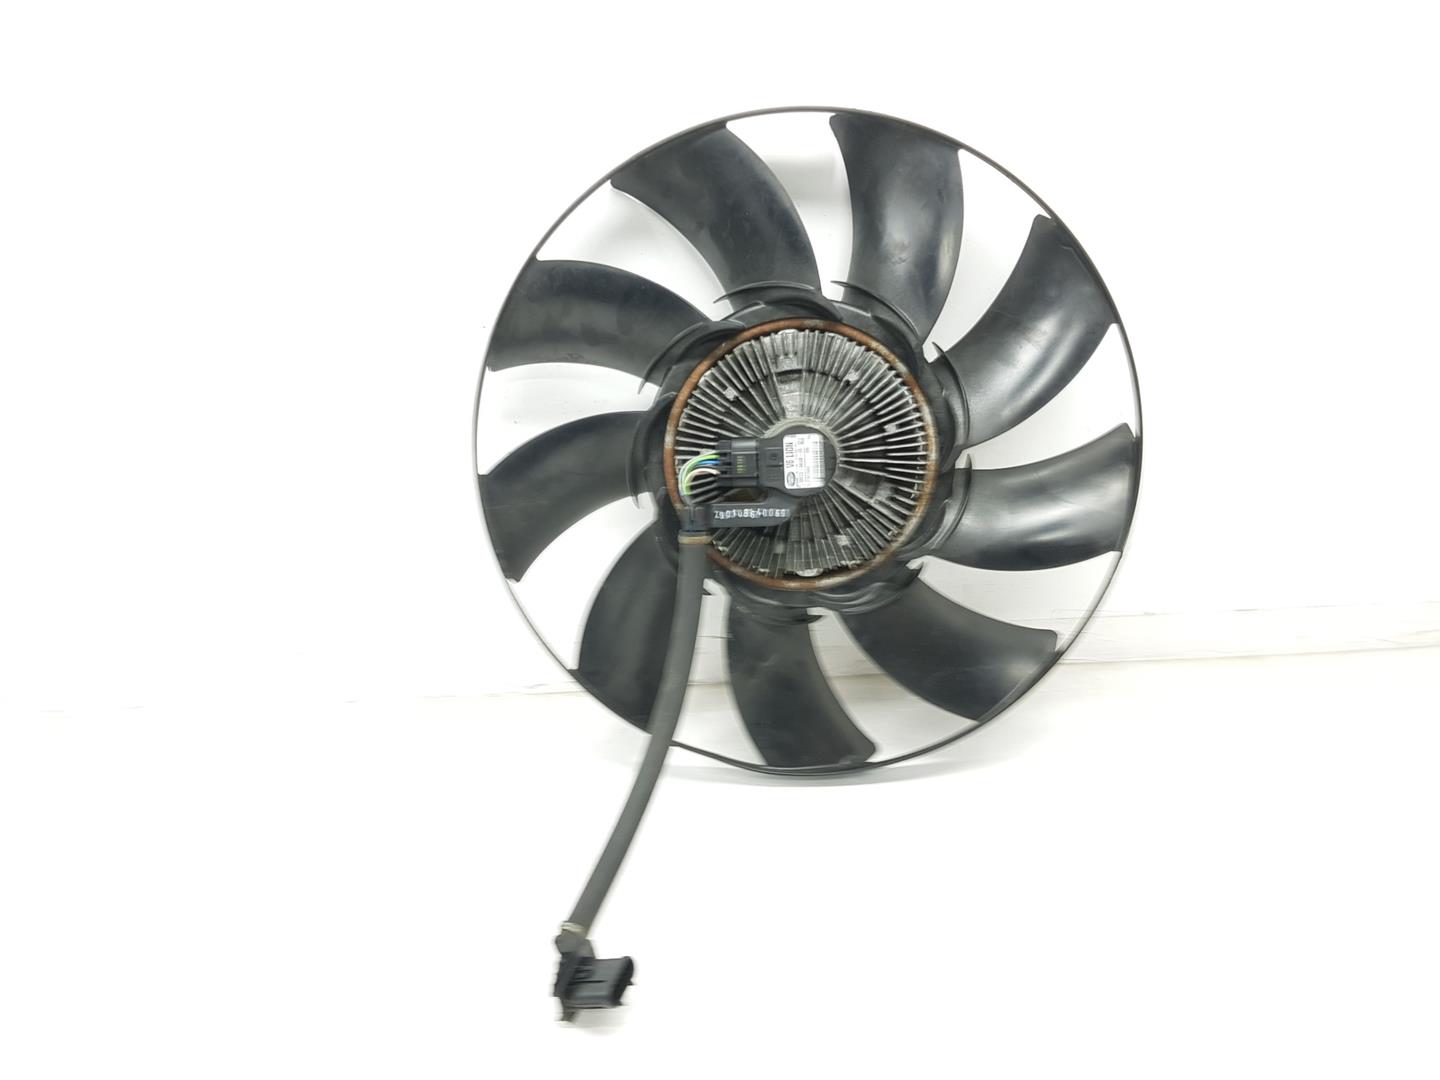 LAND ROVER Discovery 4 generation (2009-2016) Engine Cooling Fan Radiator 5H228600JB, 5H228600JB 22485955